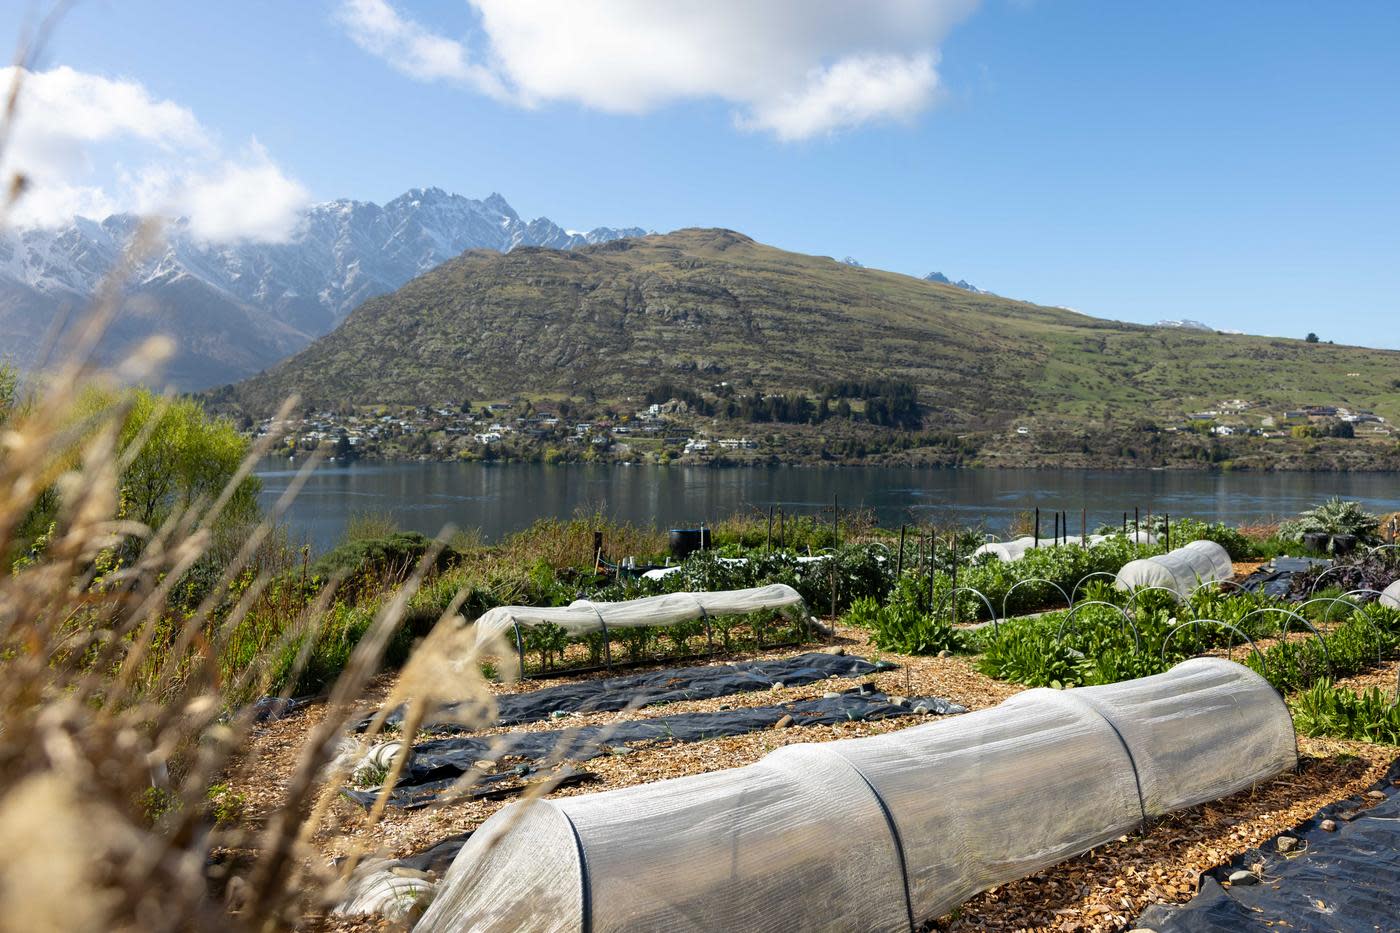 Sherwood vegetable garden overlooking Lake Whakatipu and The Remarkables in Queenstown